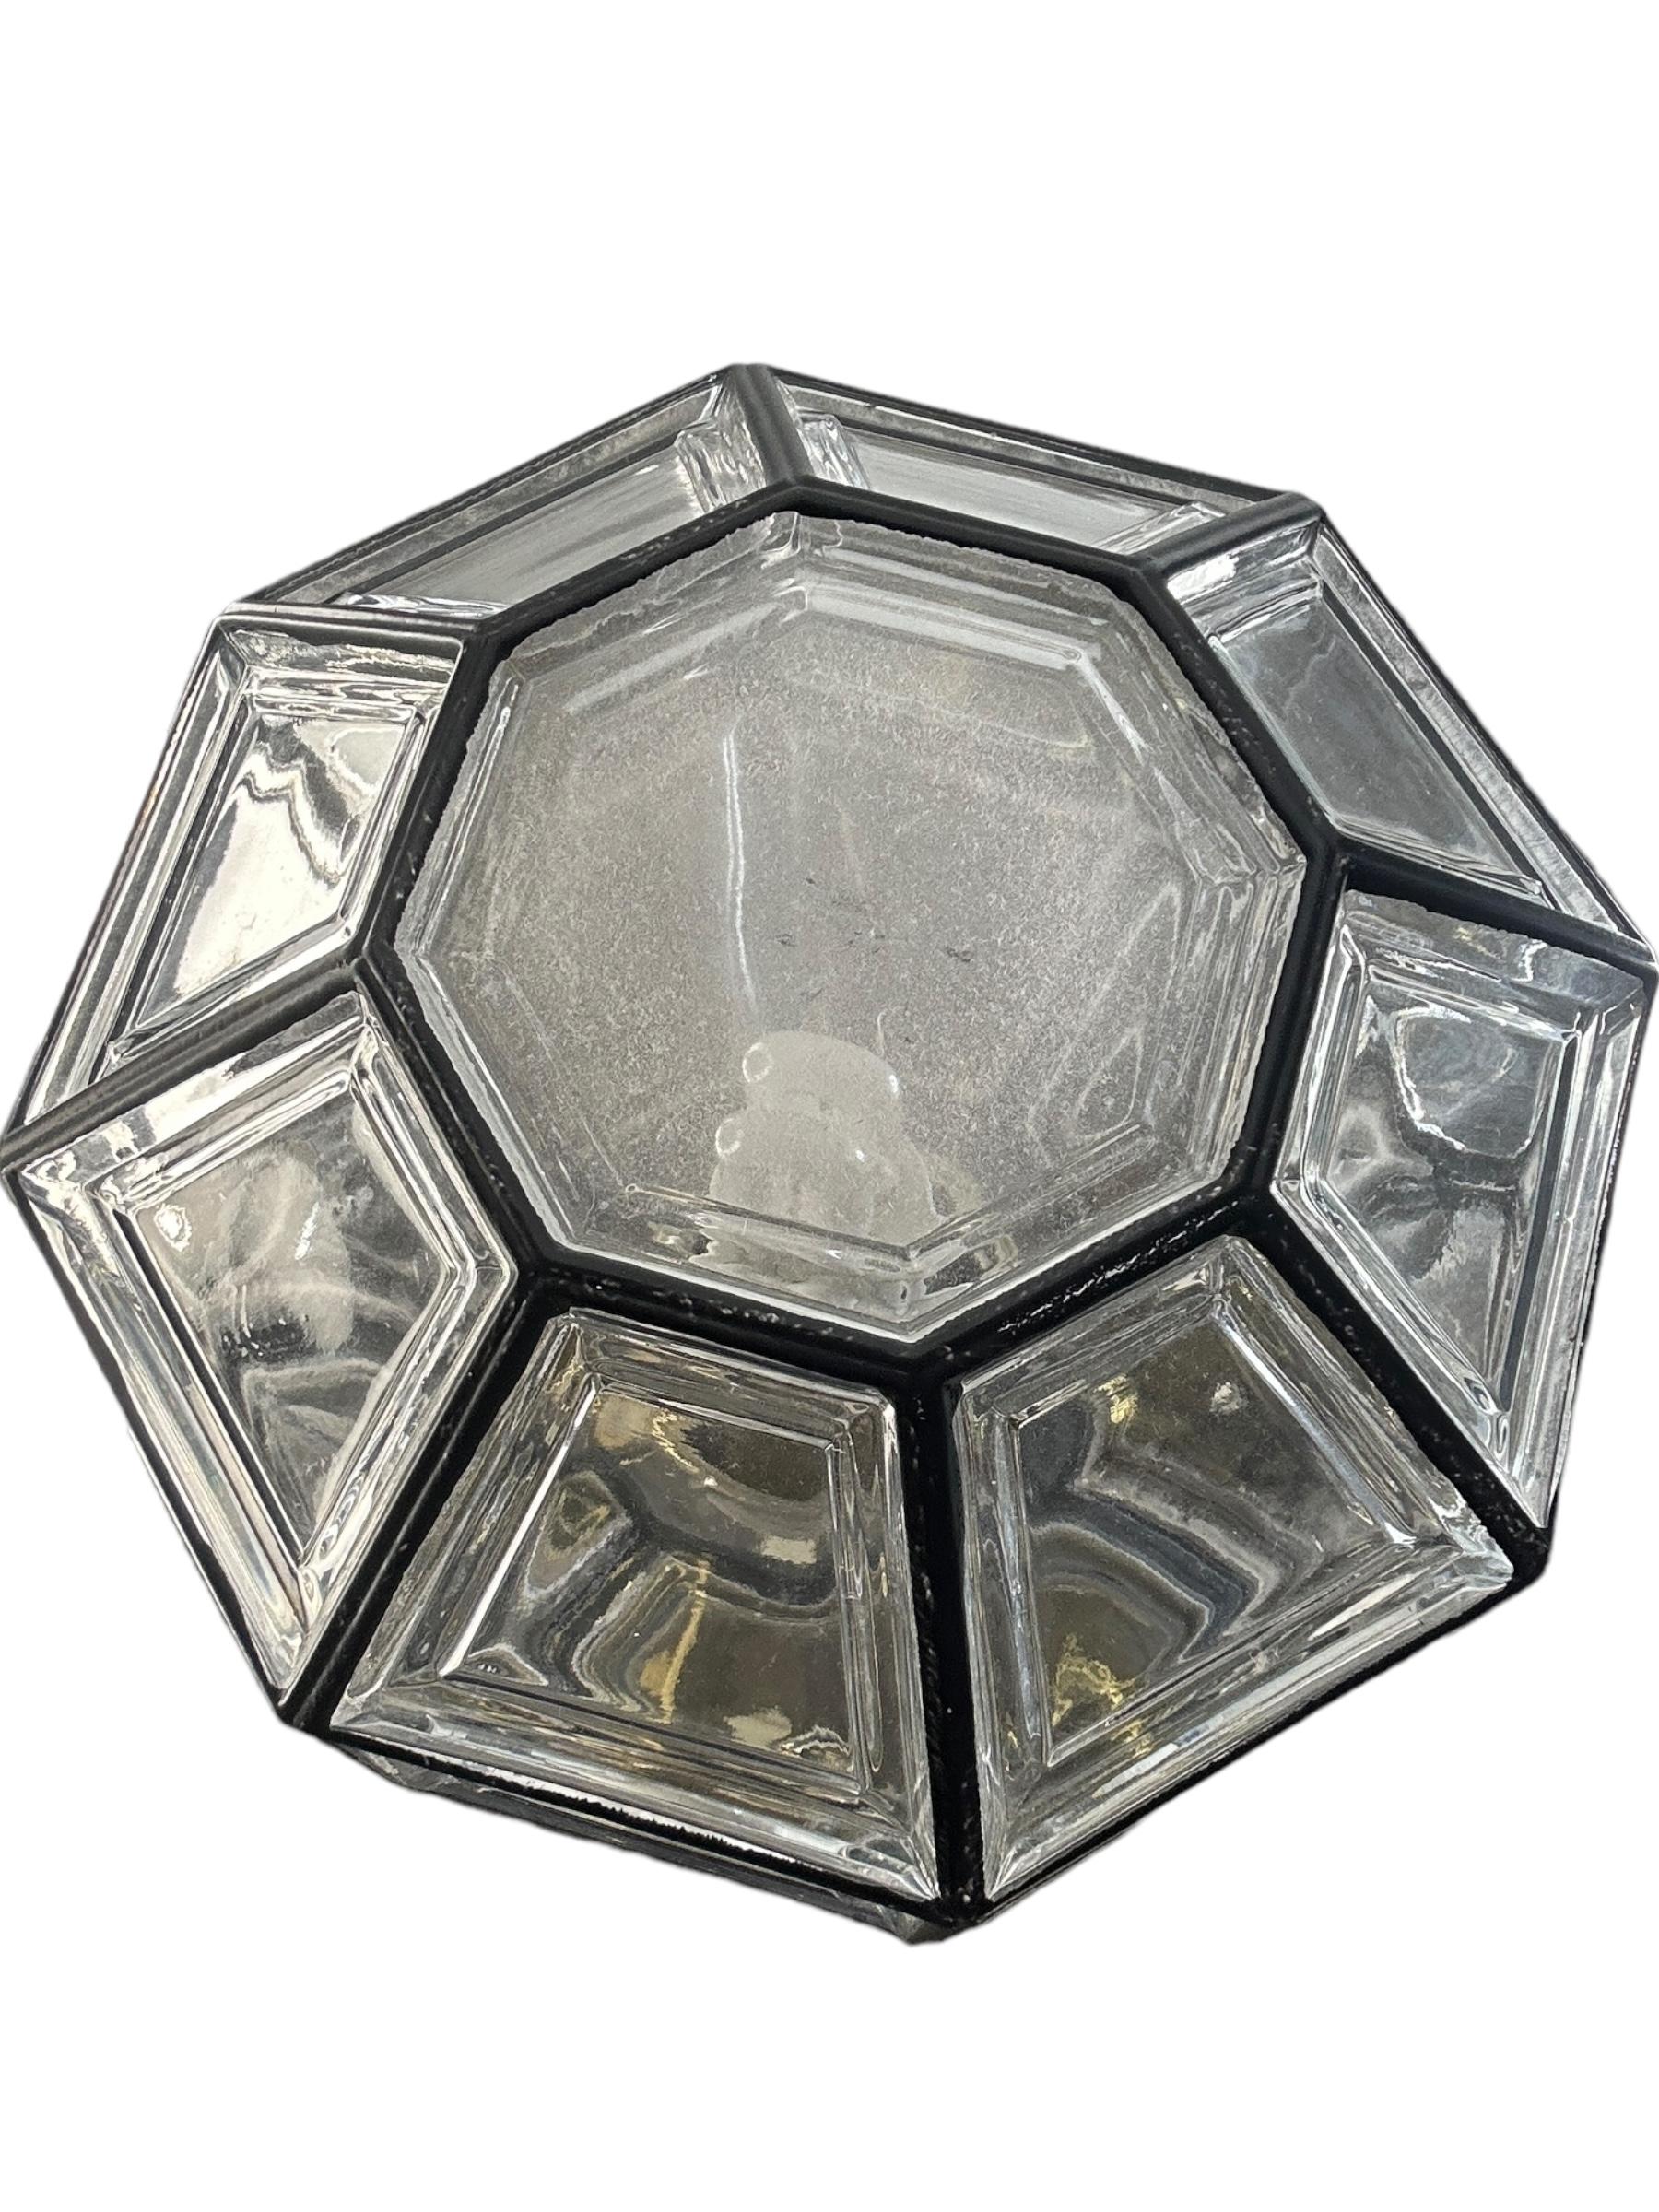 Large Mid-Century Octagonal Iron & Clear Glass Ceiling Light by Limburg, Germany For Sale 1